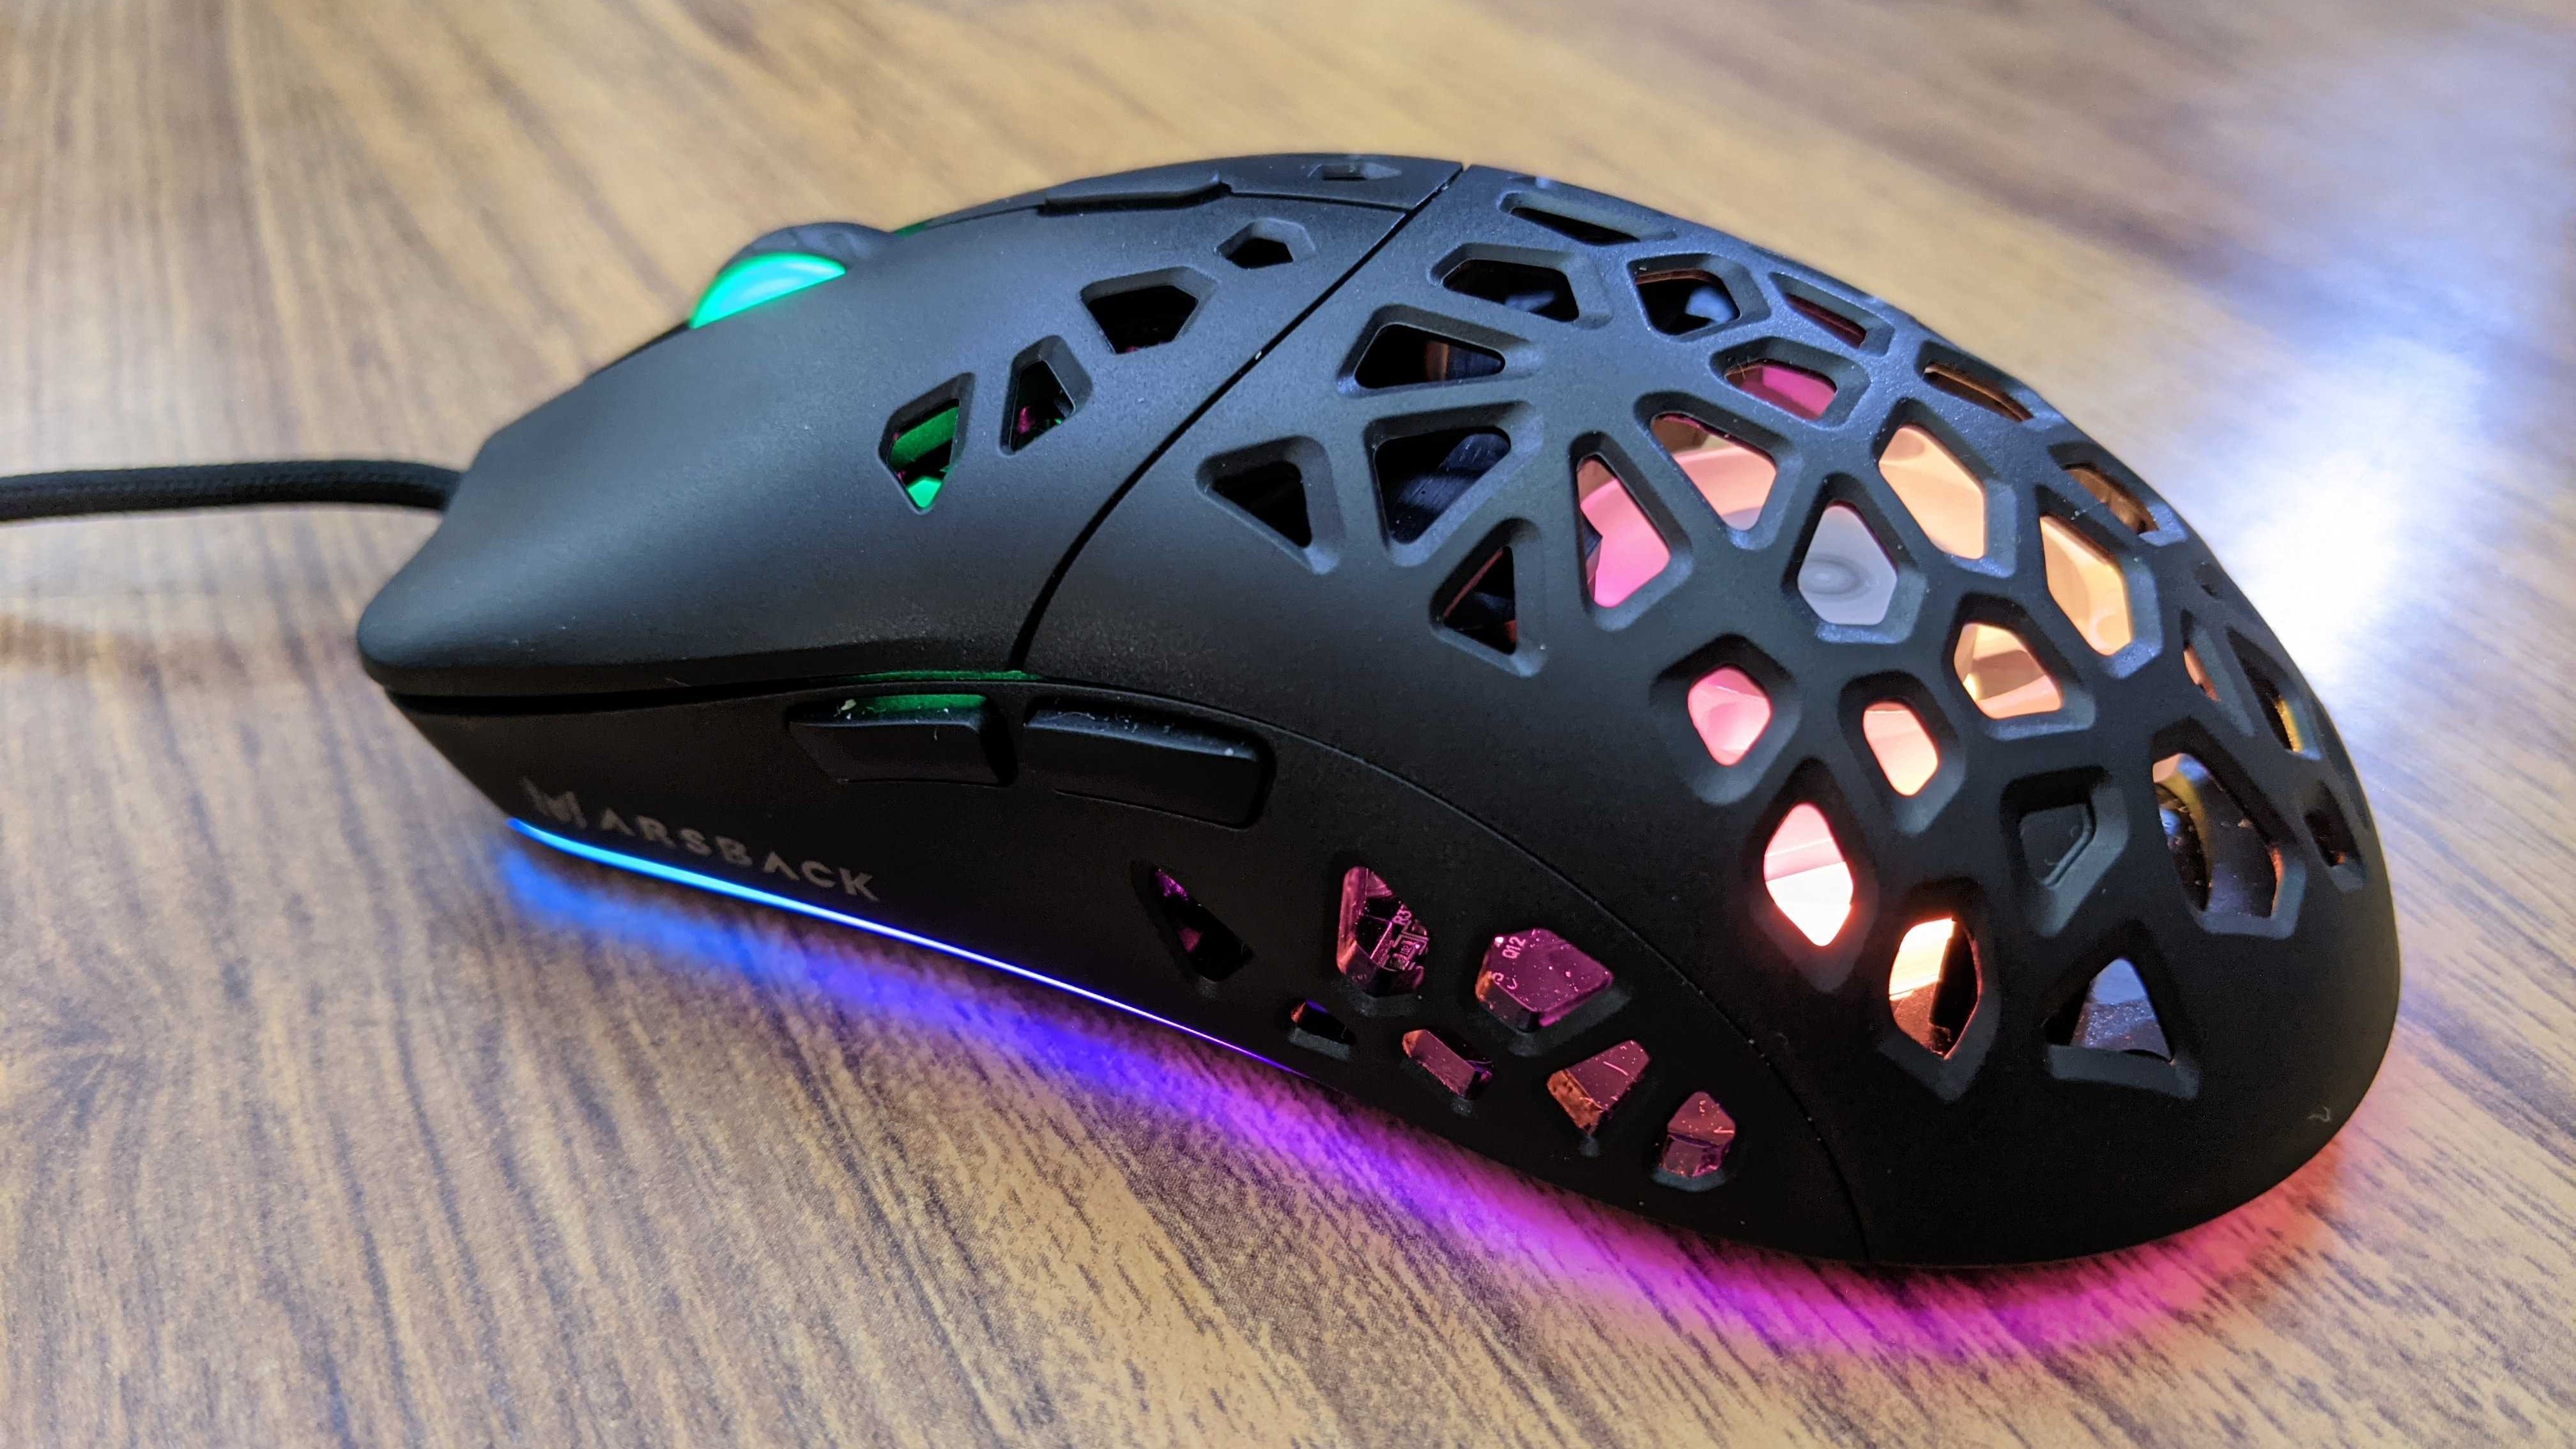 The Marsback Zephyr Pro gaming mouse from the side - the two buttons side buttons are shown off next to RGB lighting